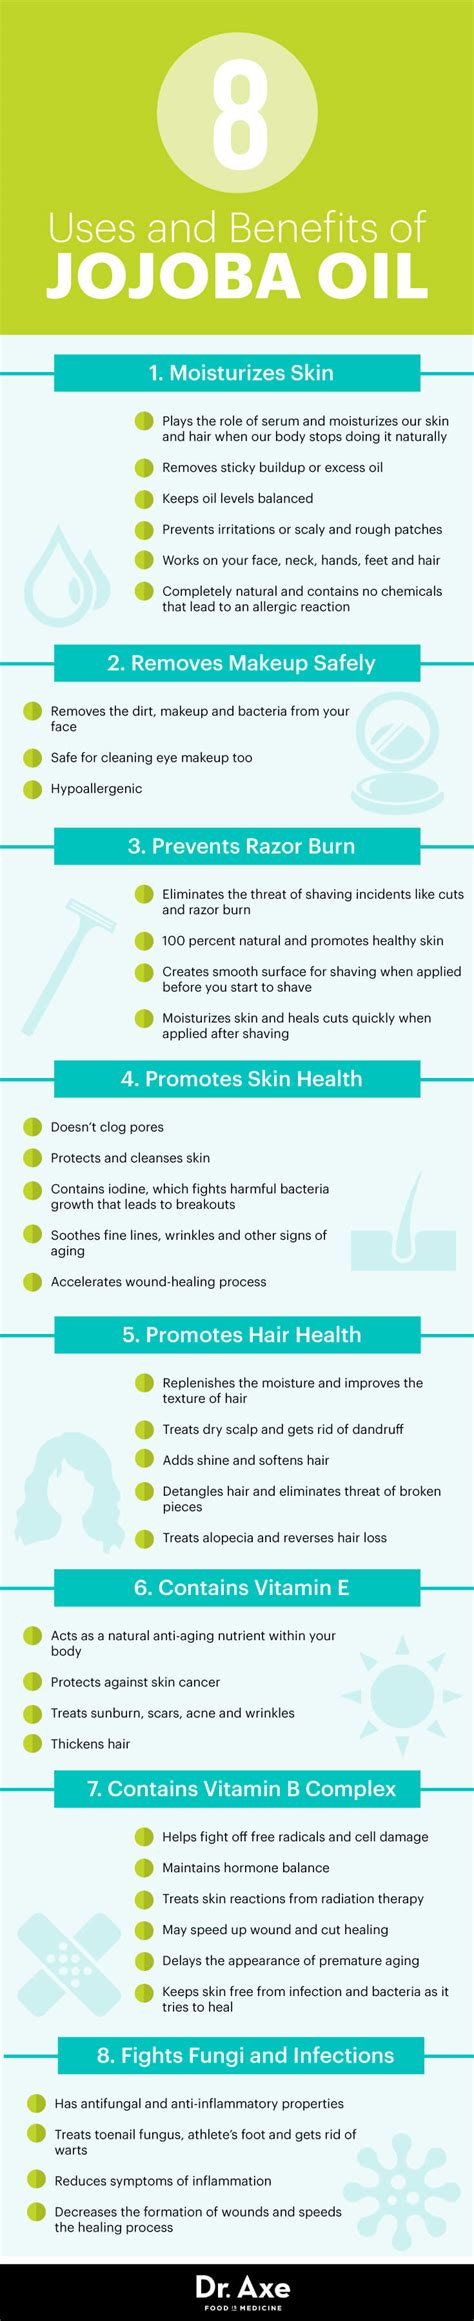 Some of these include laser hair growth hats, jojoba oil, shampoos and conditioners, vitamins and much more. Surprising Beauty Uses And Benefits Of Jojoba Oil For ...